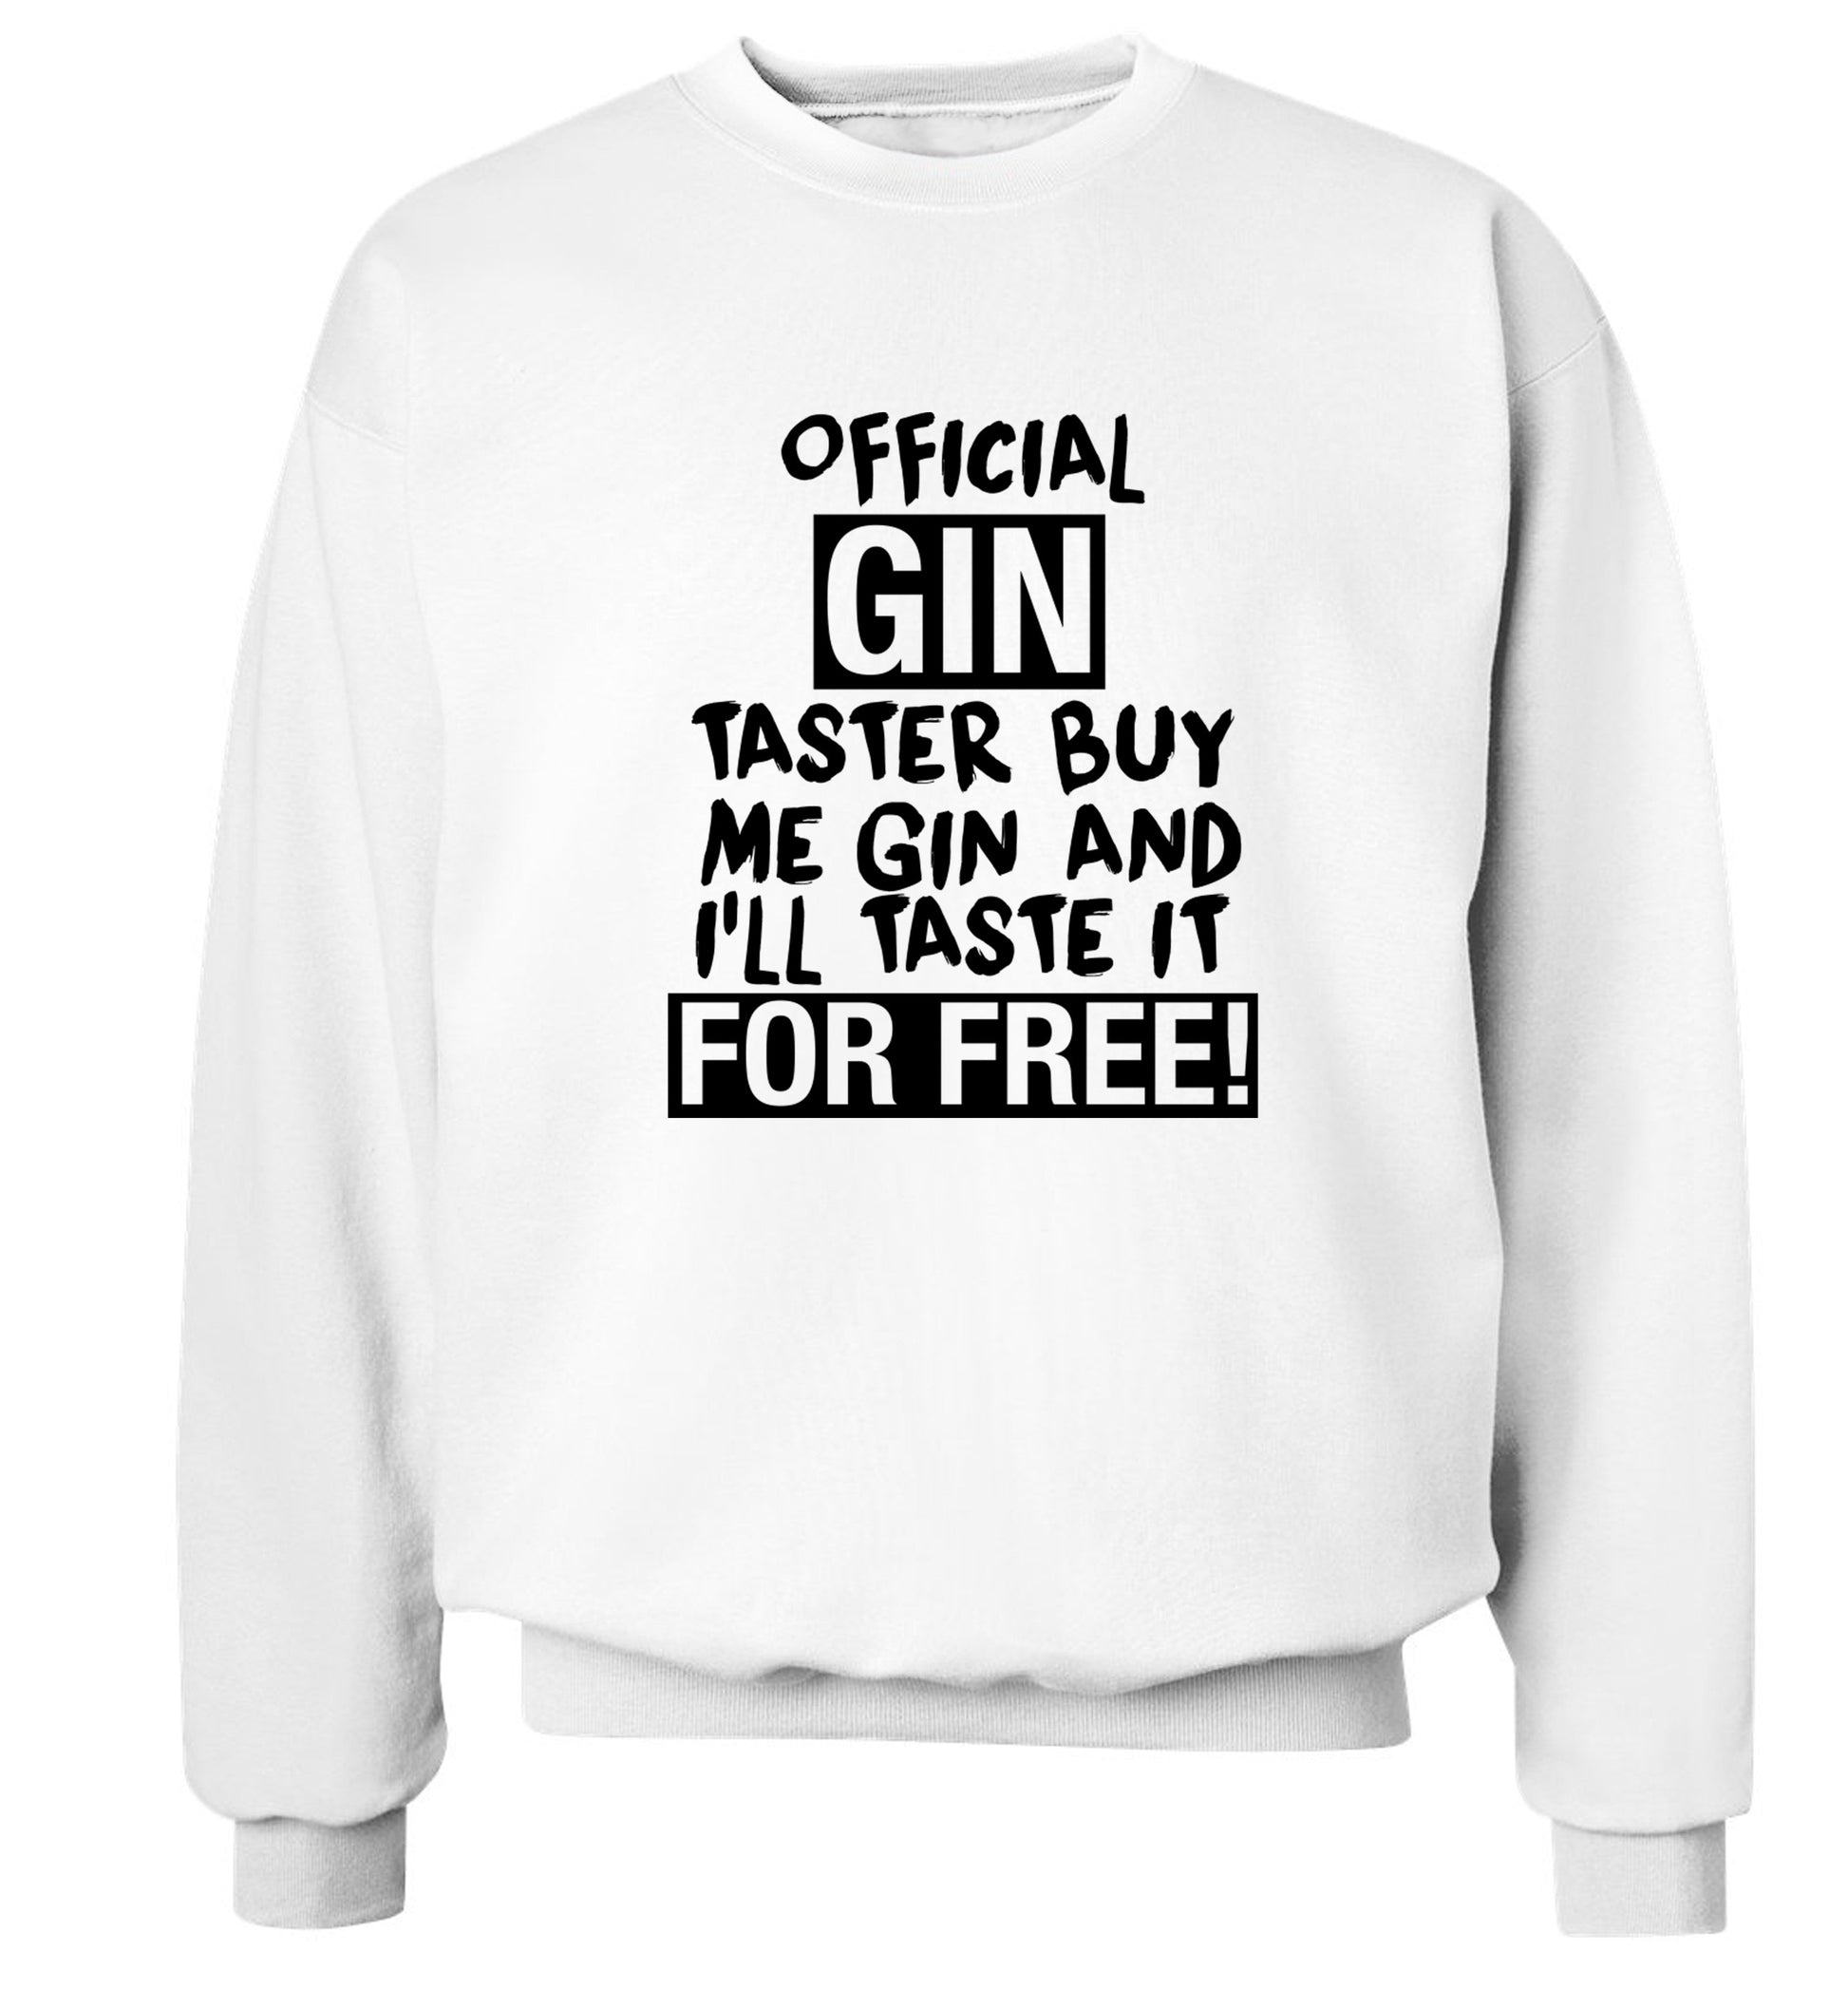 Official gin taster buy me gin and I'll taste it for free Adult's unisex white Sweater 2XL